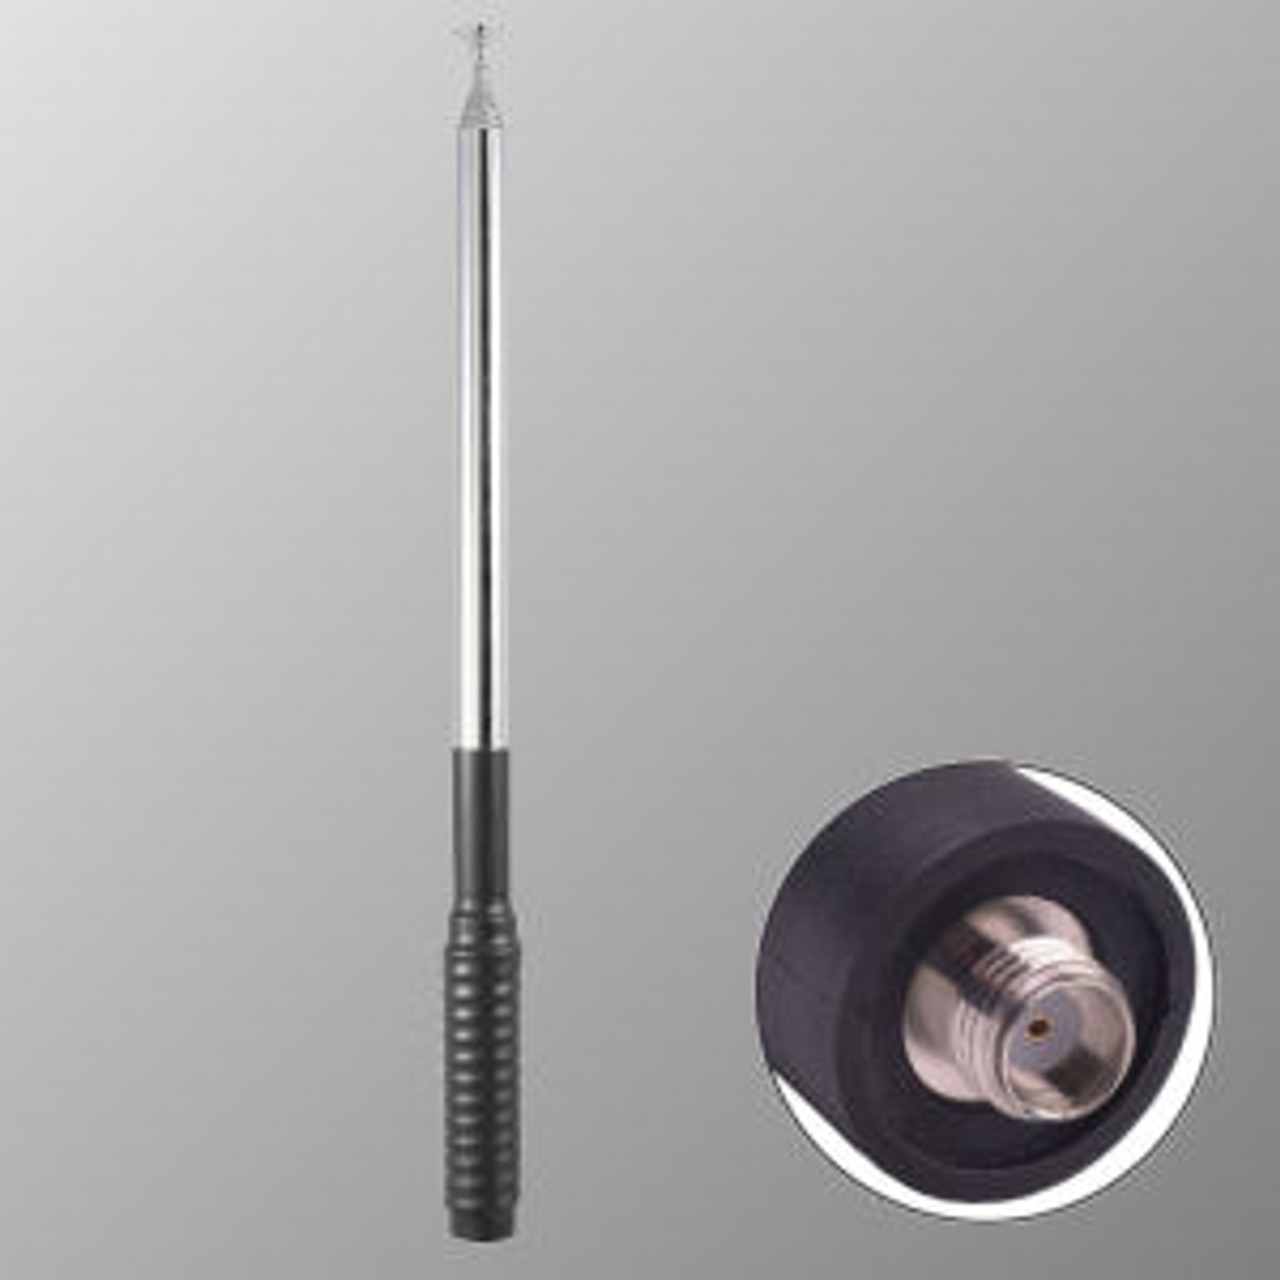 Telescopic Extended Range Antenna For Kenwood NX-210, 6-9dB Gain - VHF, 160-170 MHz (Federal & Wildland Firefighting Freqs)